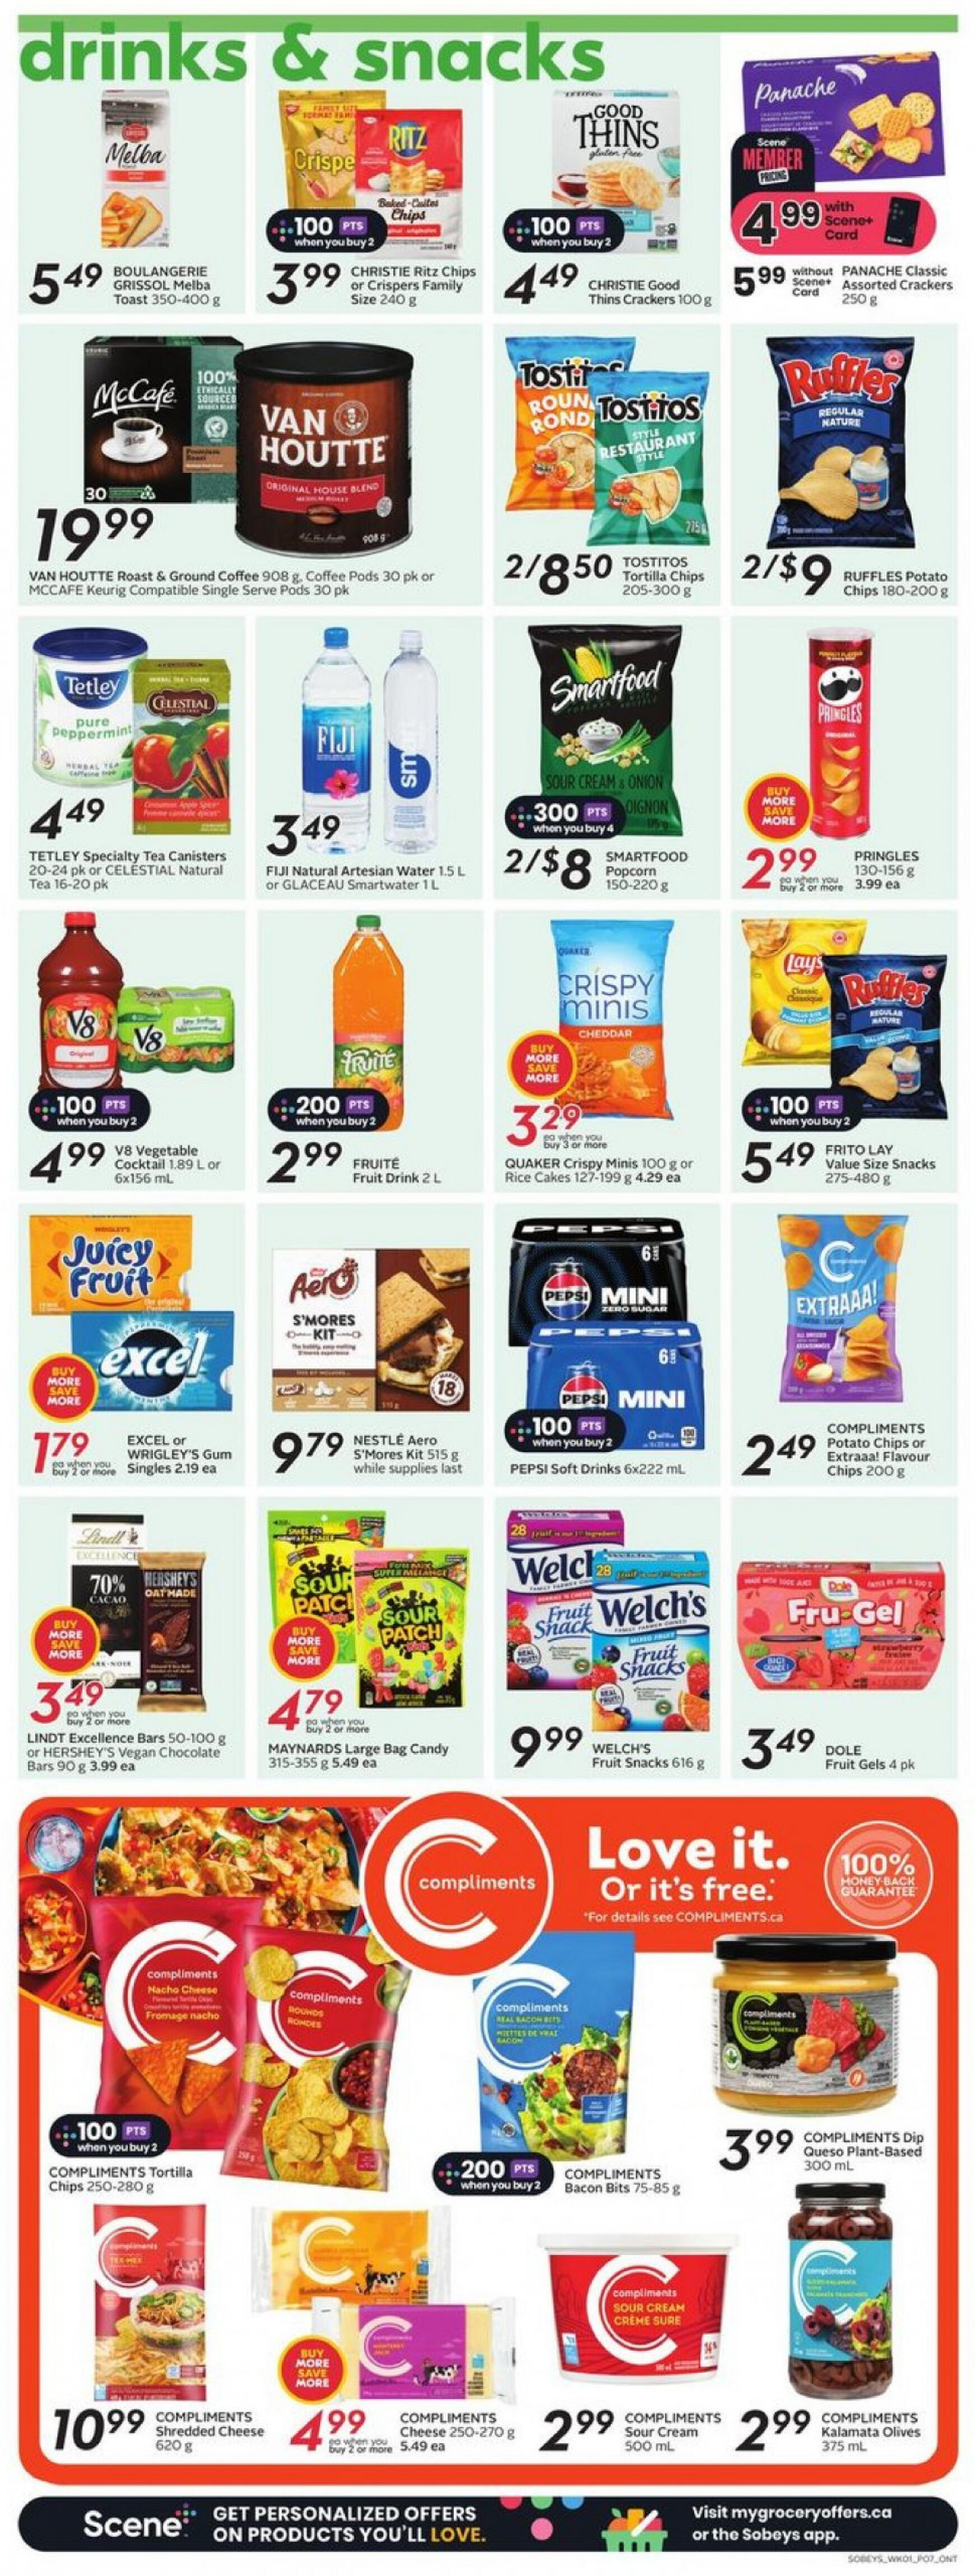 sobeys - Sobeys - Weekly Flyer - Ontario flyer current 02.05. - 08.05. - page: 13